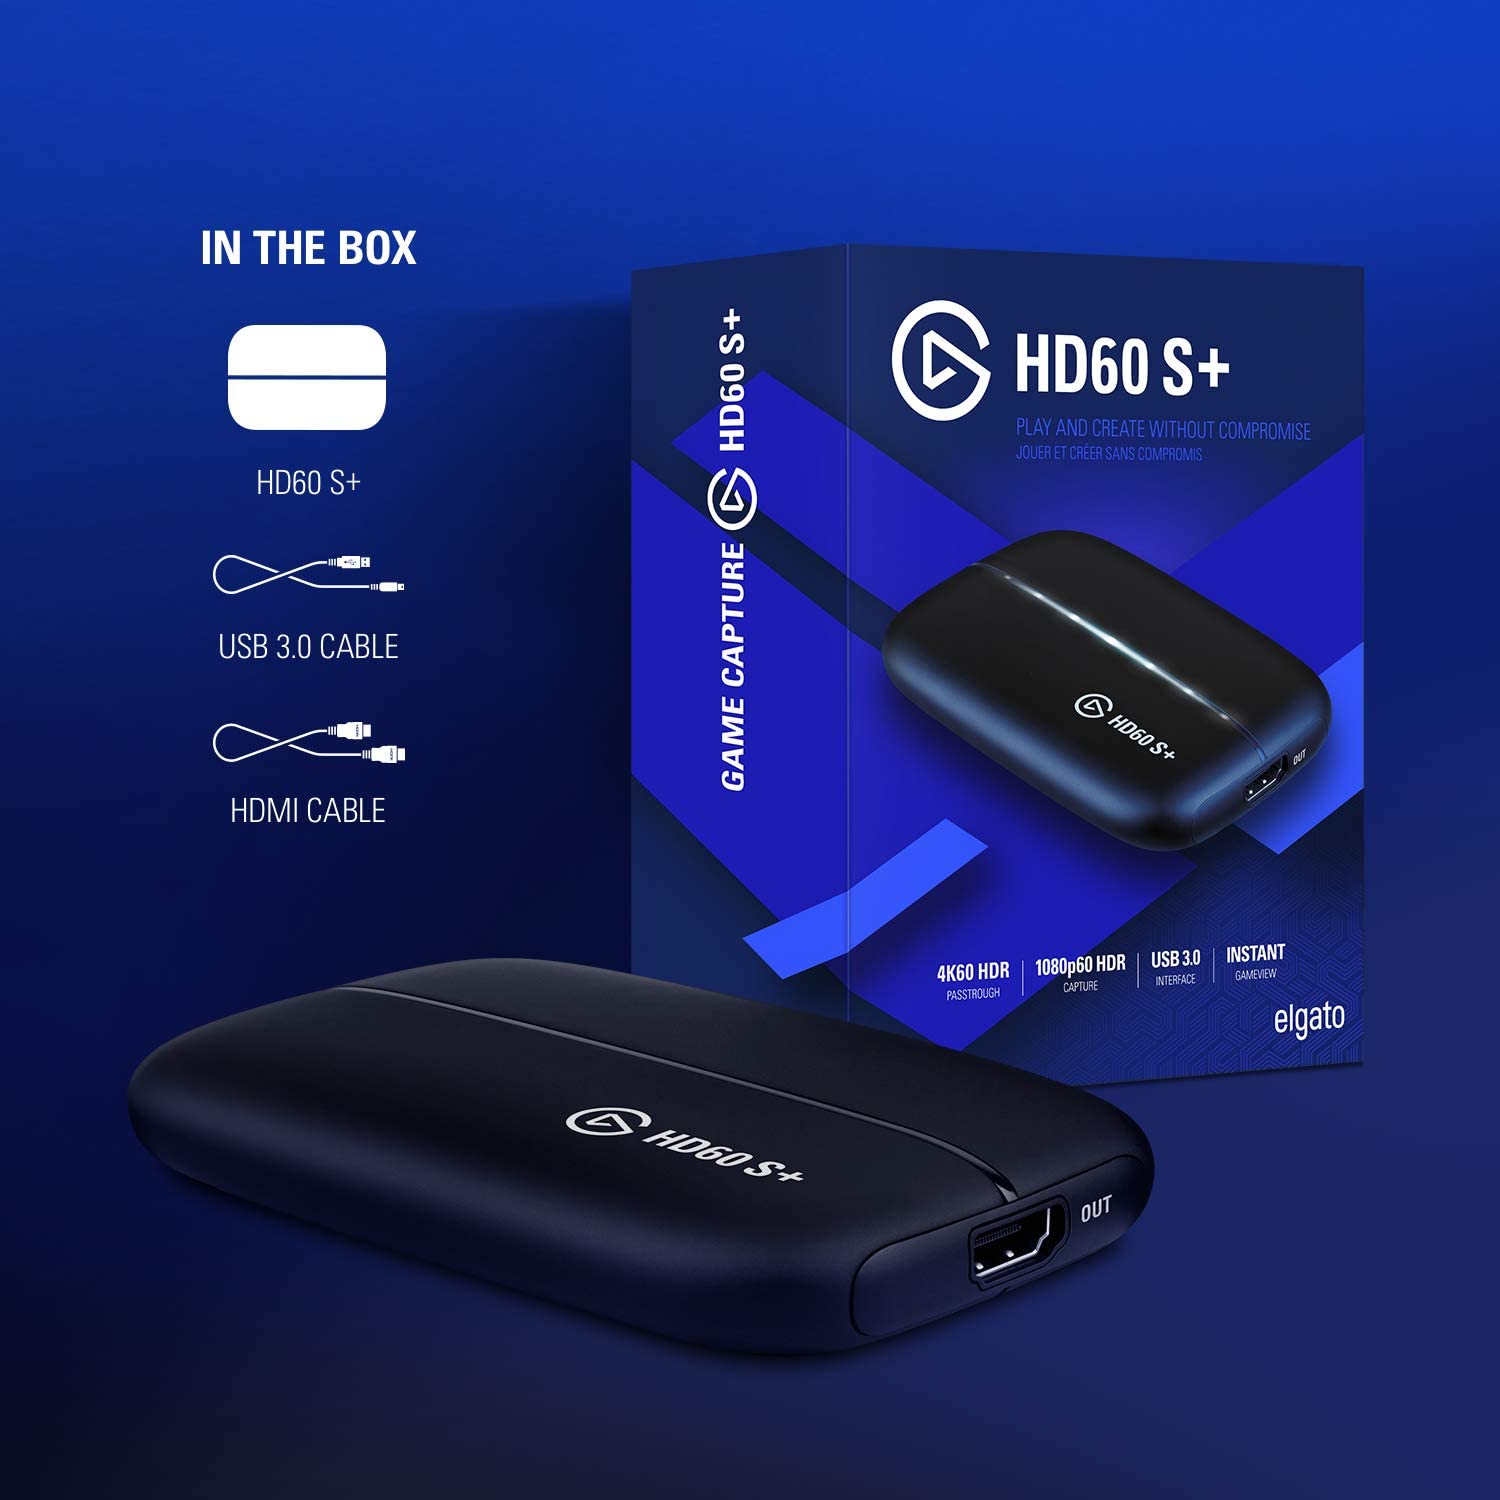 Elgato Game Capture Hd60 S 1080p60 Hdr10 Capture With 4k60 Hdr10 Zero